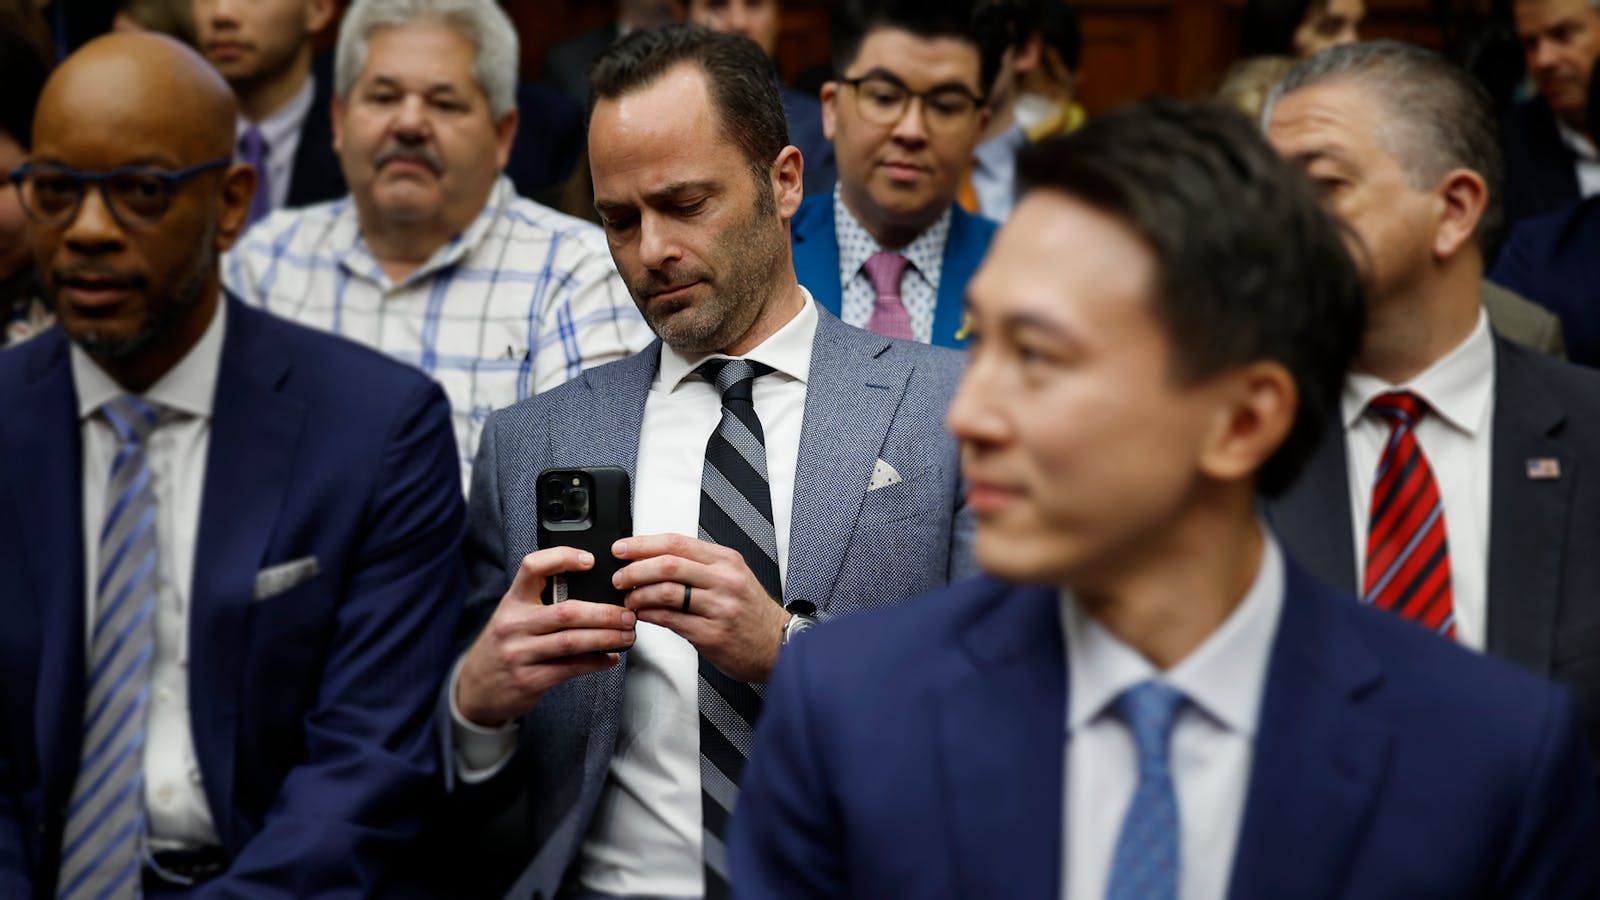 TikTok vice president Michael Beckerman photographs CEO Shou Zi Chew before he testifies to Congress on March 23. Photo by Getty.